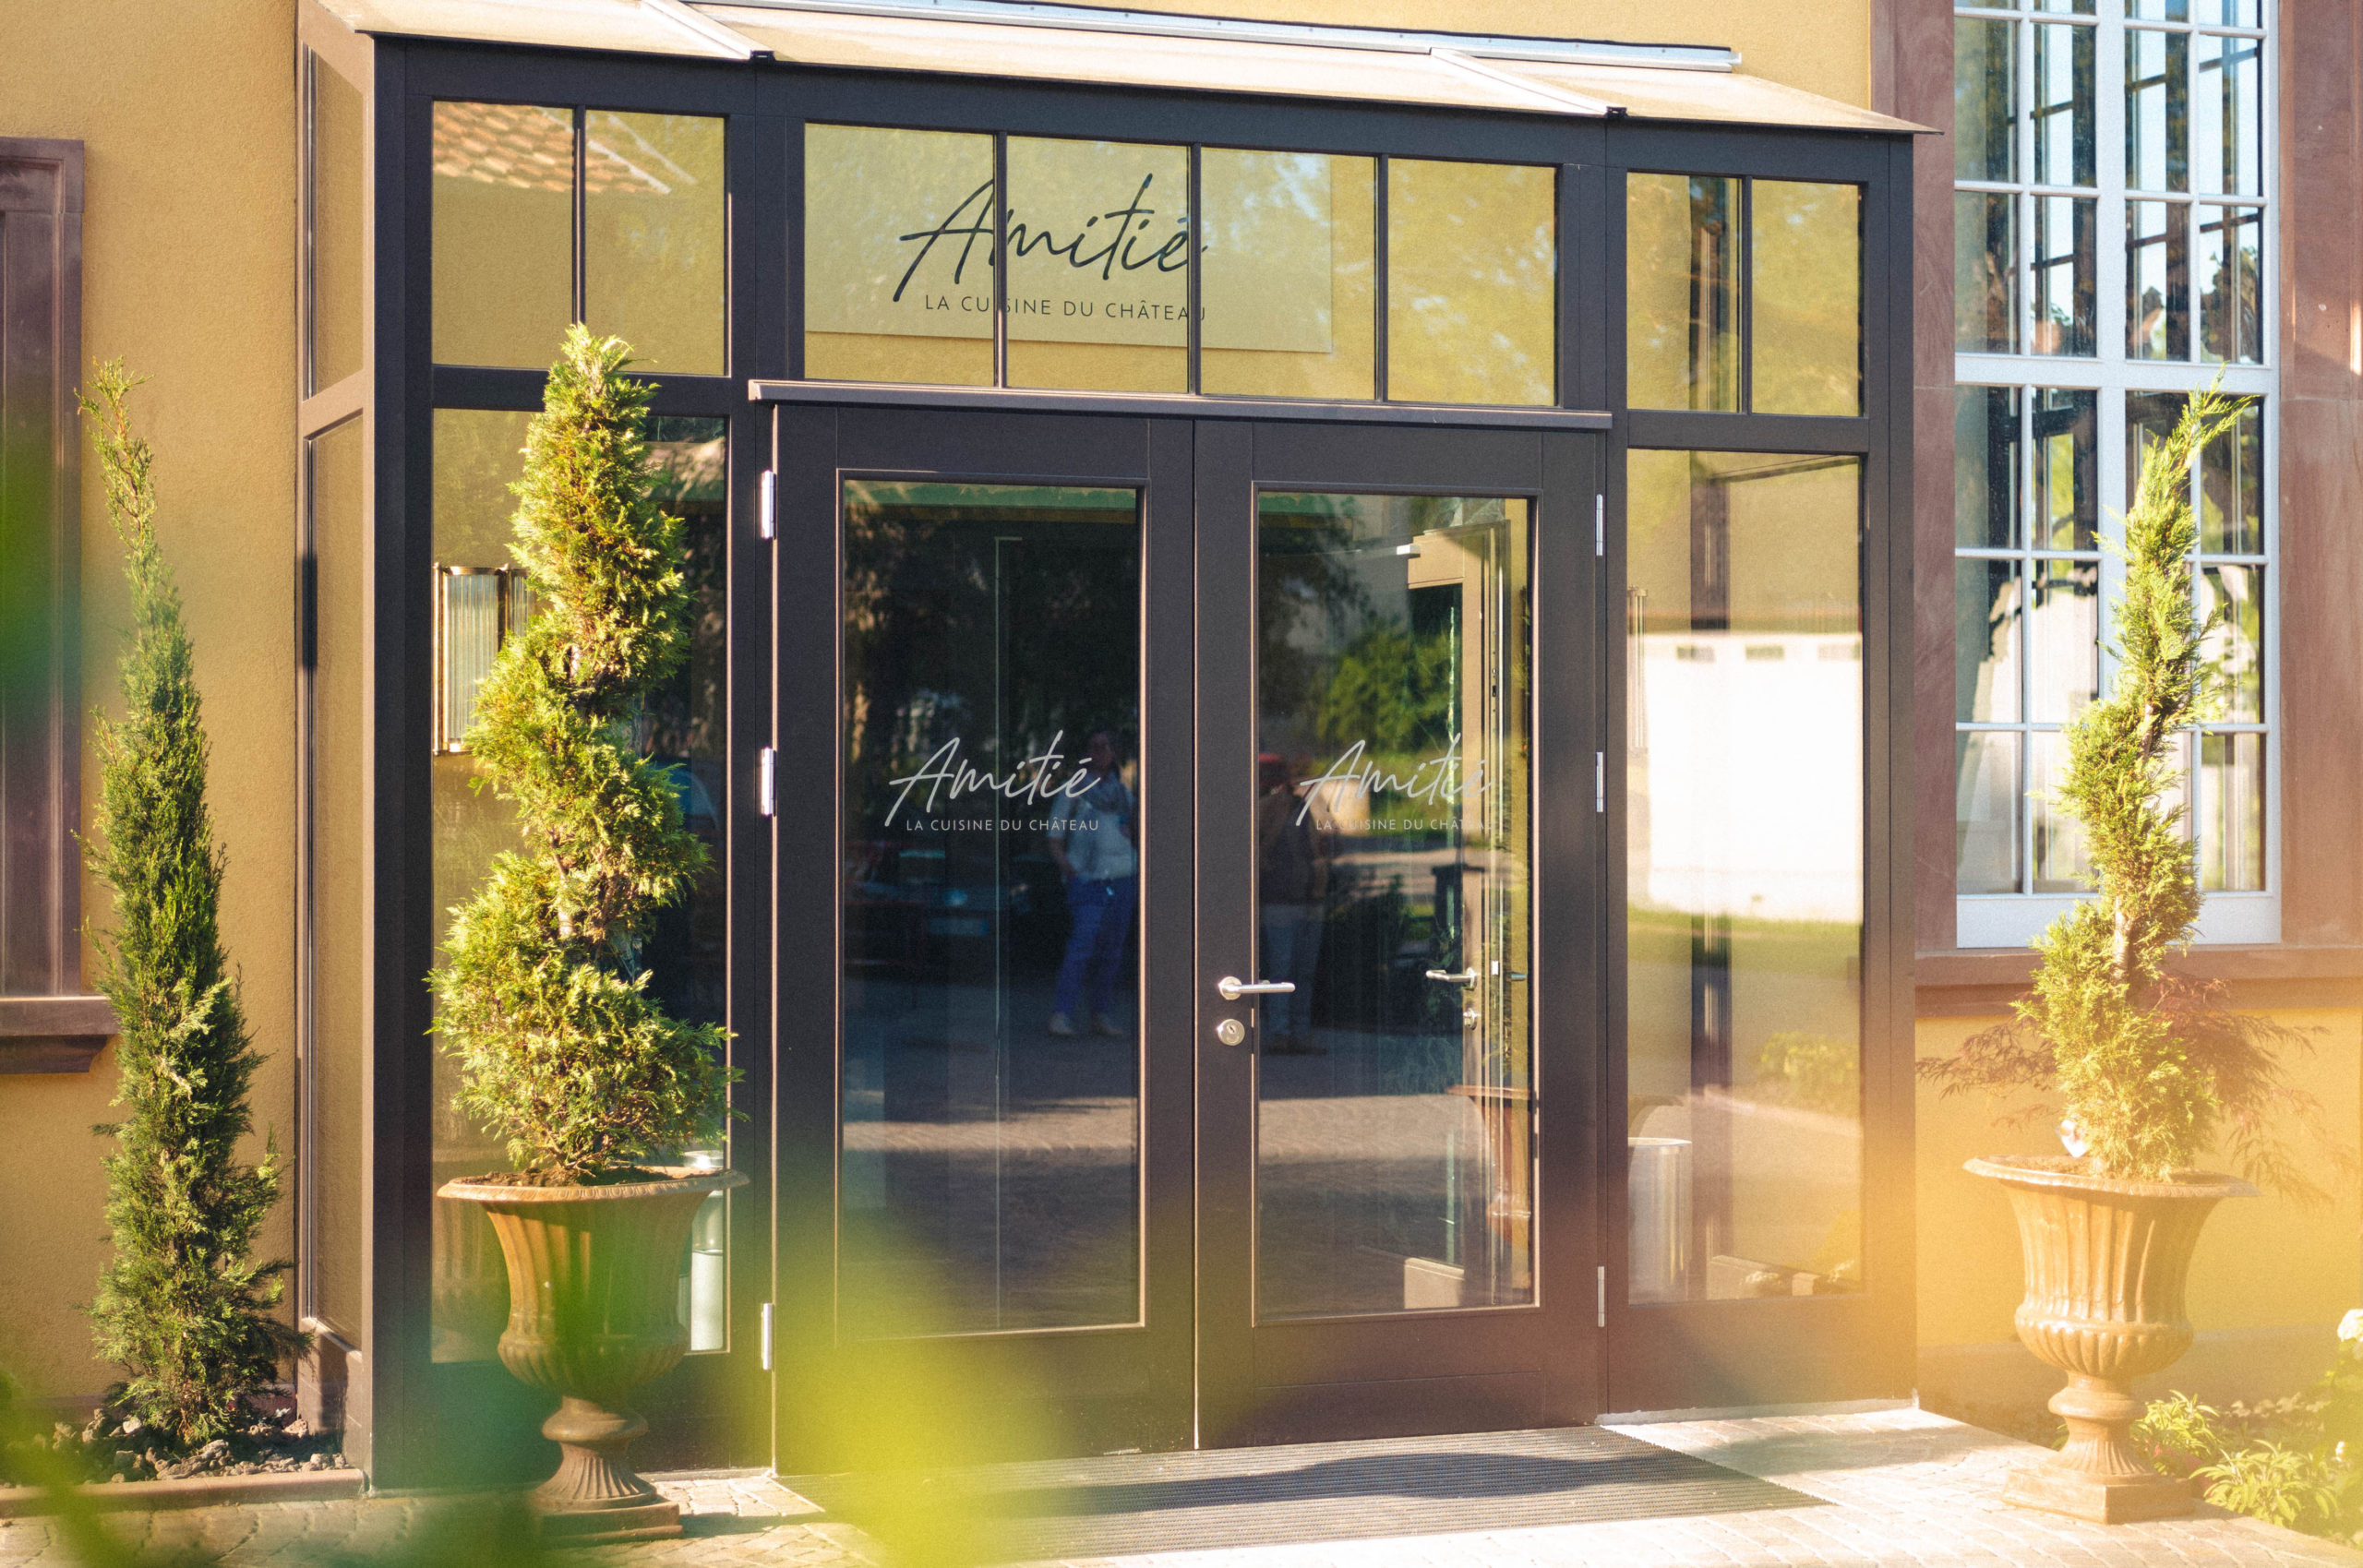 Welcome to the Restaurant Amitié in Hartmannswiller, near the Château Ollwiller and in right in the heart of the vineyards of Alsace.